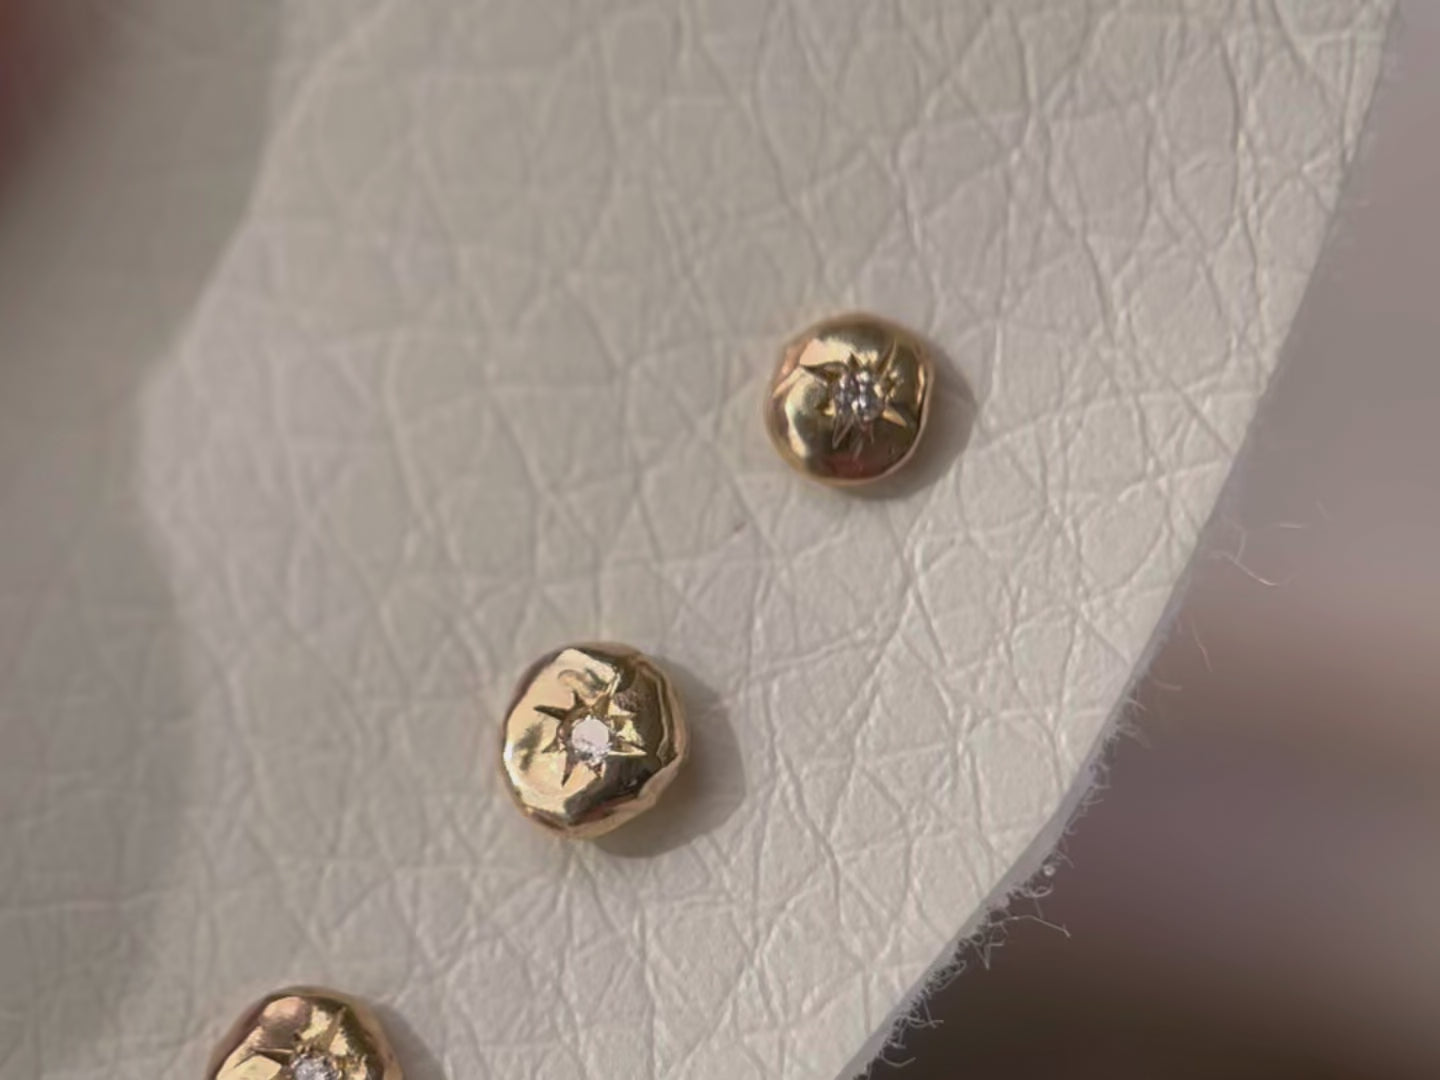 A close up video of multiple one of a kind tiny 14k gold circle studs with star set diamonds in the centers.